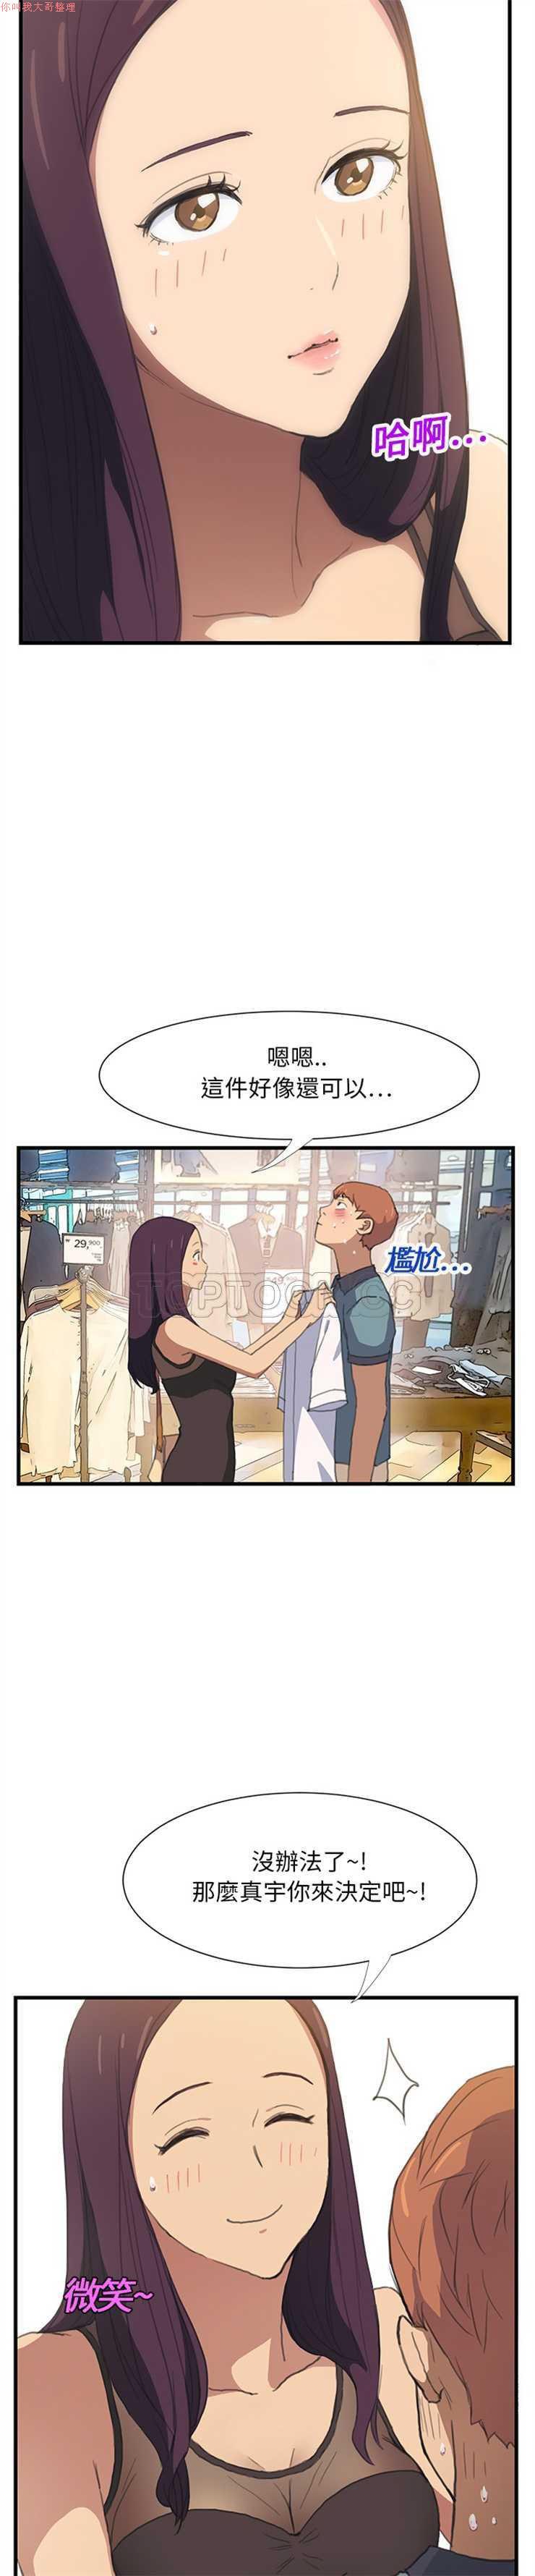 Pure 18 继母 Chinese Passionate - Page 2